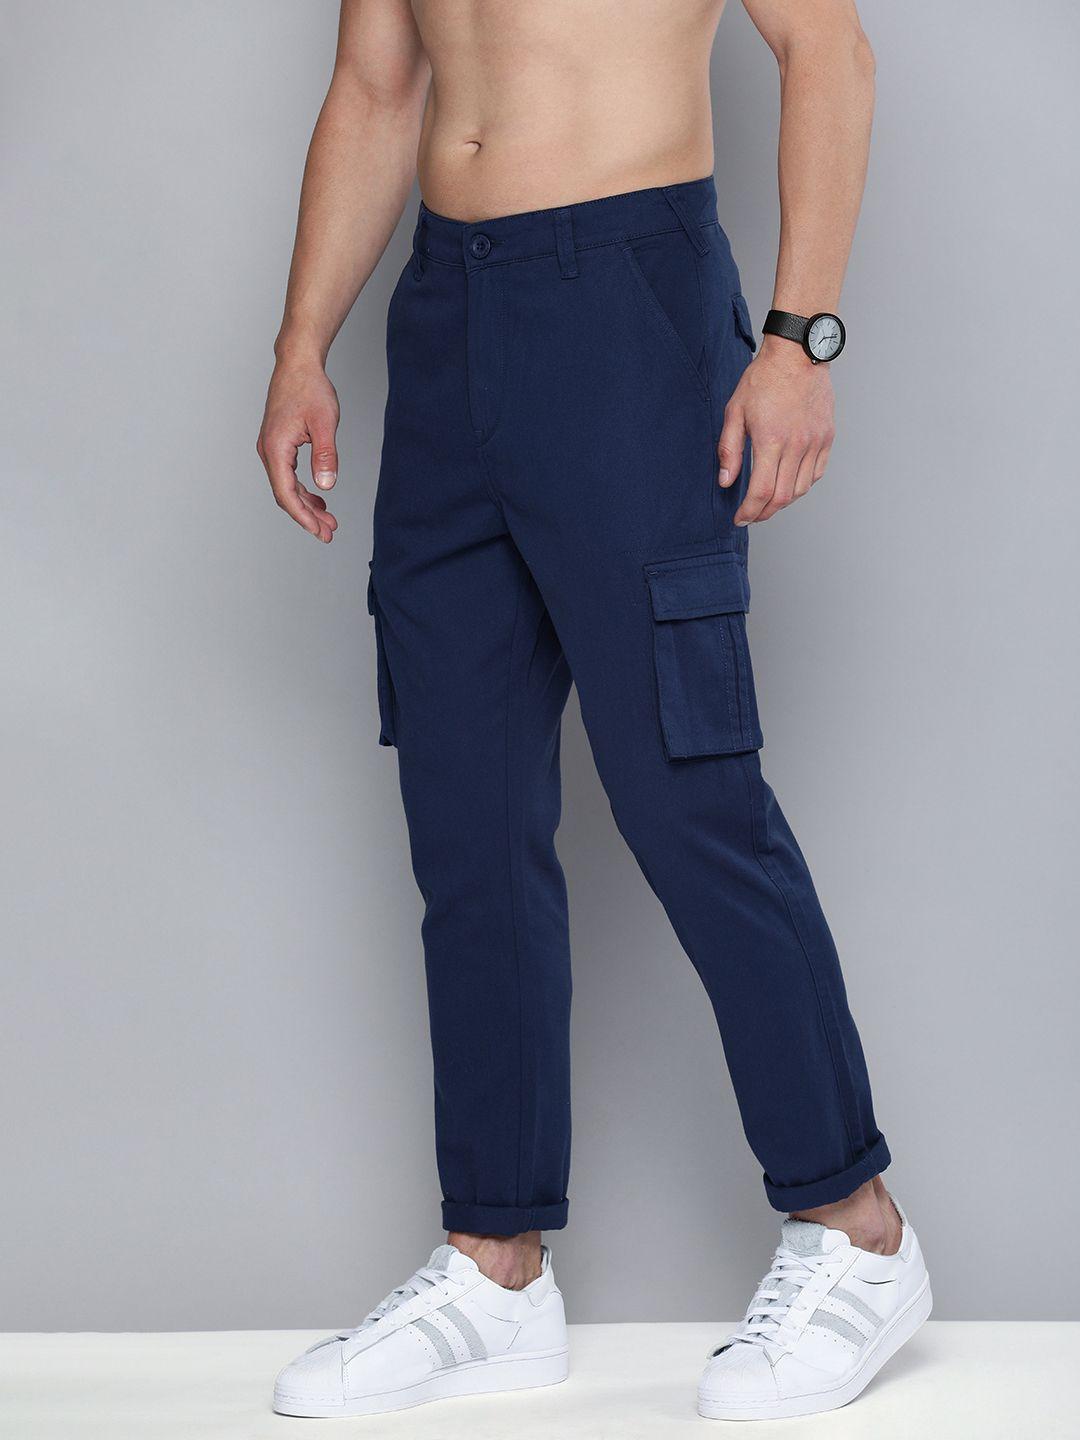 here&now men navy blue solid mid-rise regular fit cargos trousers